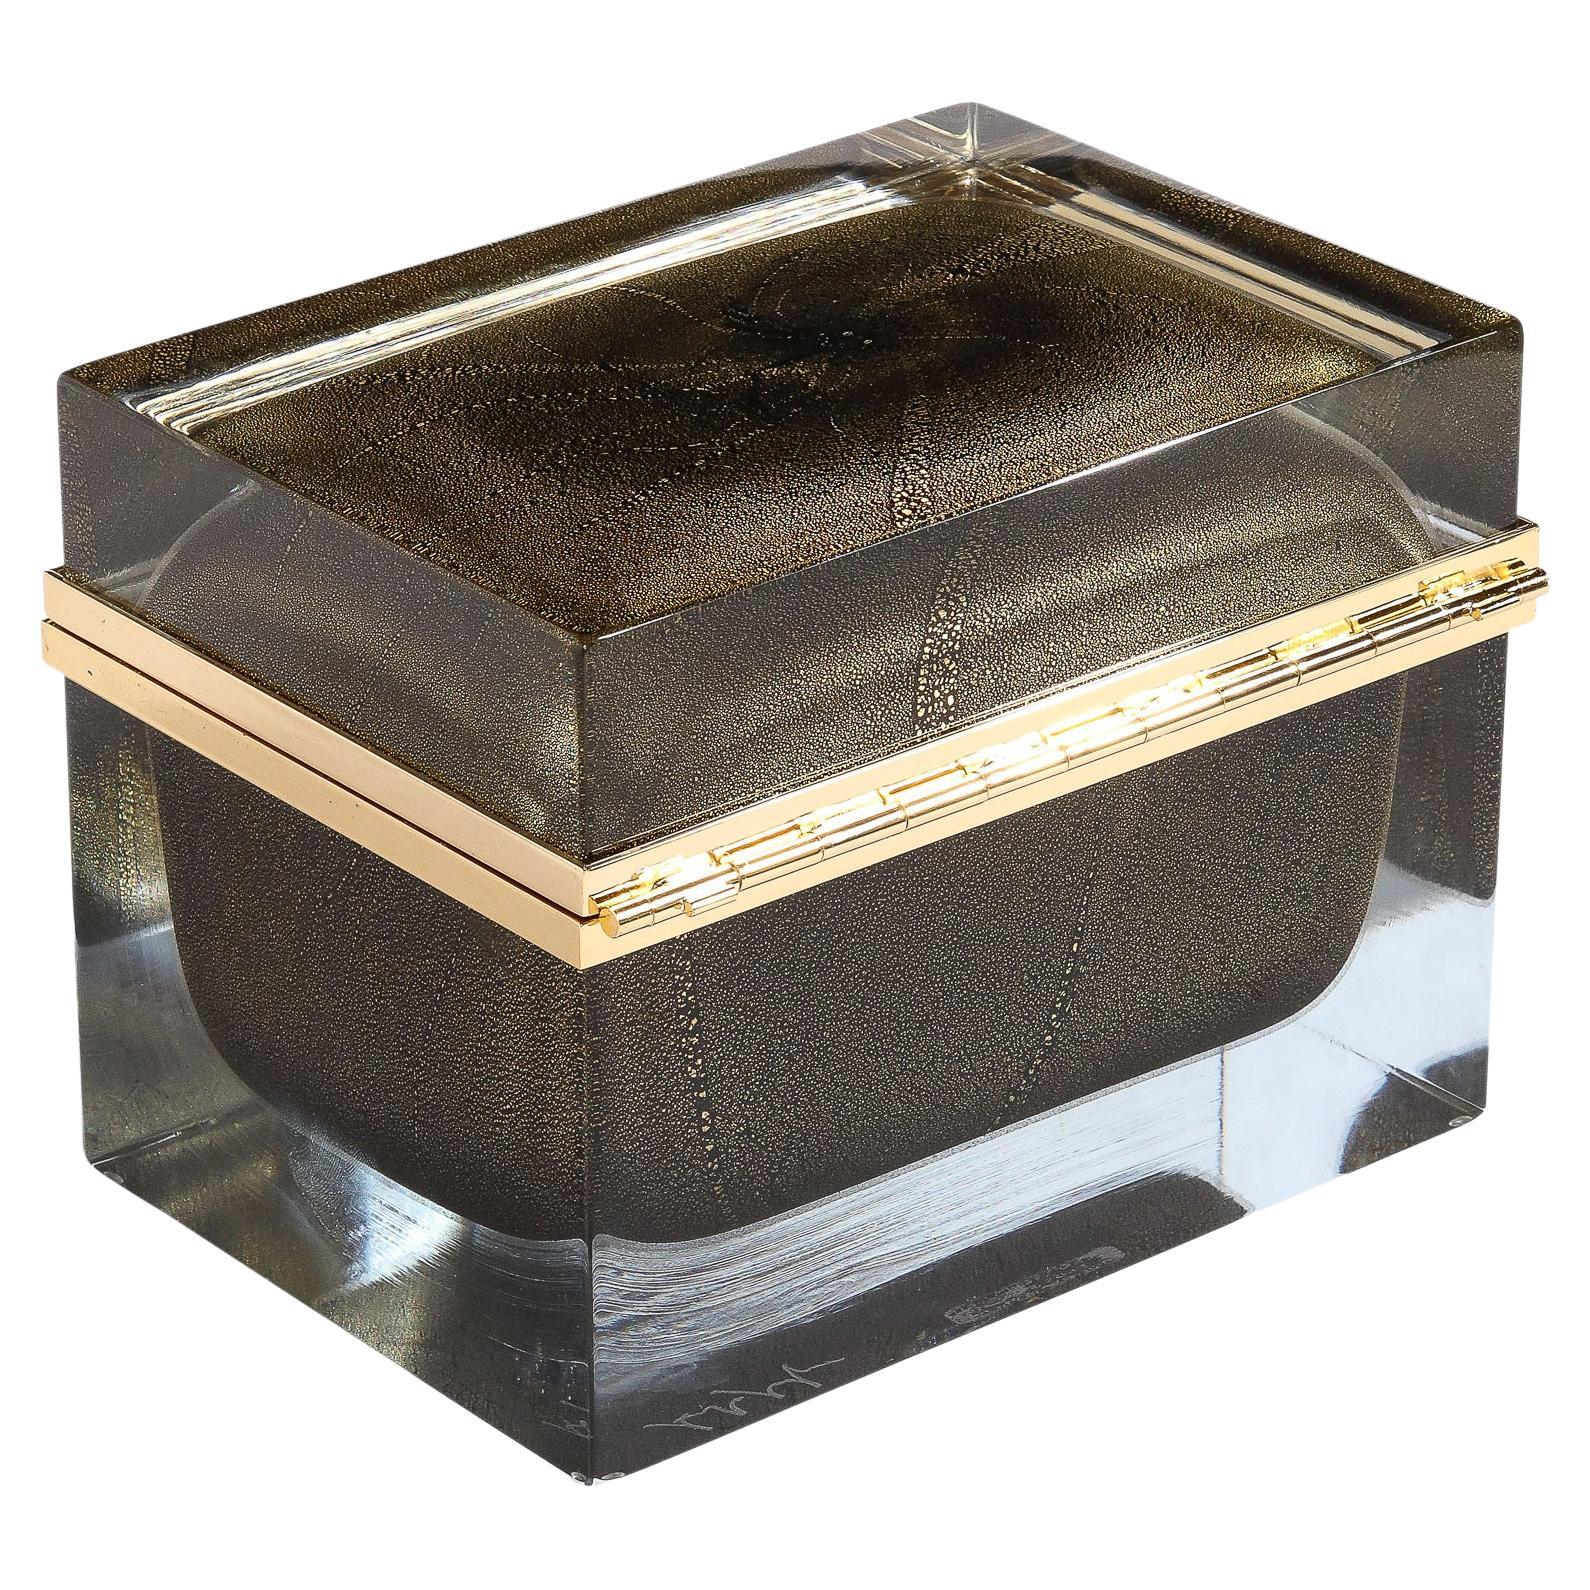 This stunning modernist decorative box was realized in Murano, Italy- the island off the coast of Venice renowned for centuries for its superlative glass production. It features a volumetric rectangular body with a translucent Murano glass exterior